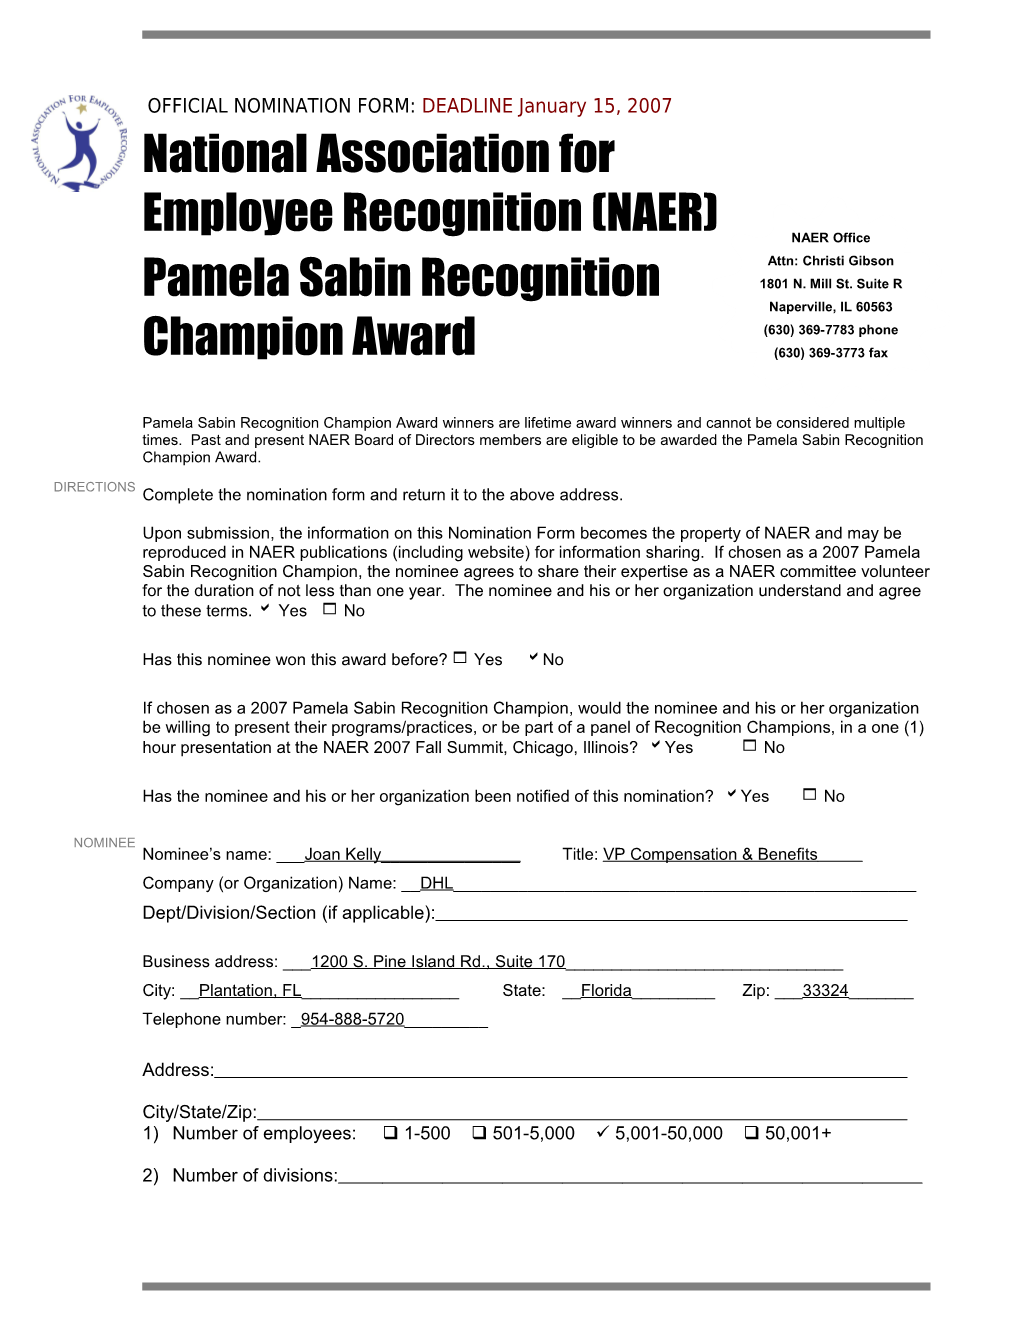 2003 Official Nomination Form: February 28 Deadline